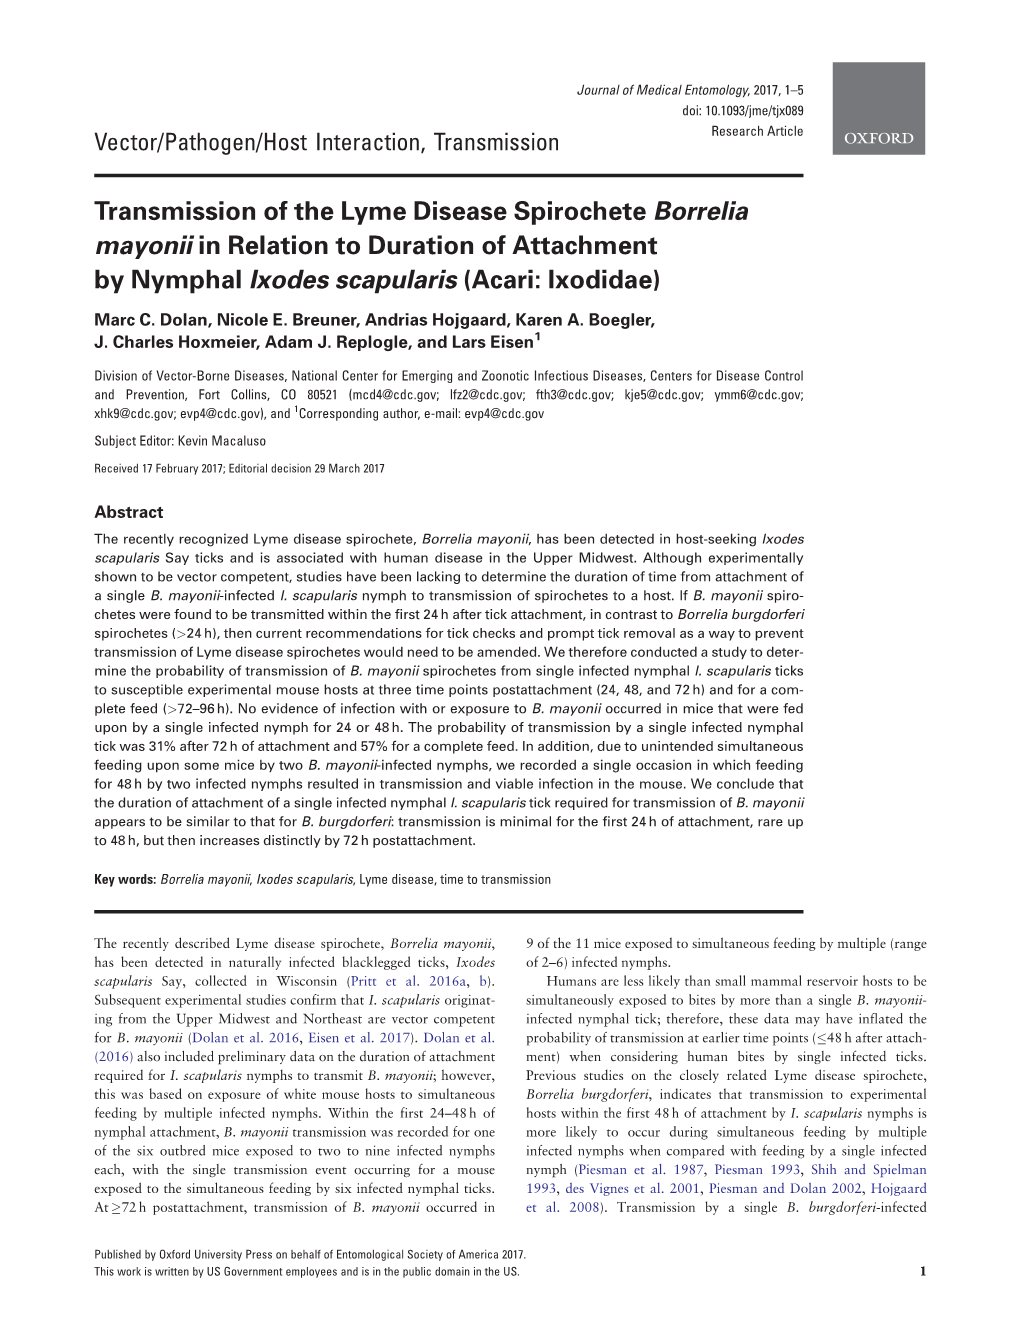 Transmission of the Lyme Disease Spirochete Borrelia Mayonii in Relation to Duration of Attachment by Nymphal Ixodes Scapularis (Acari: Ixodidae)